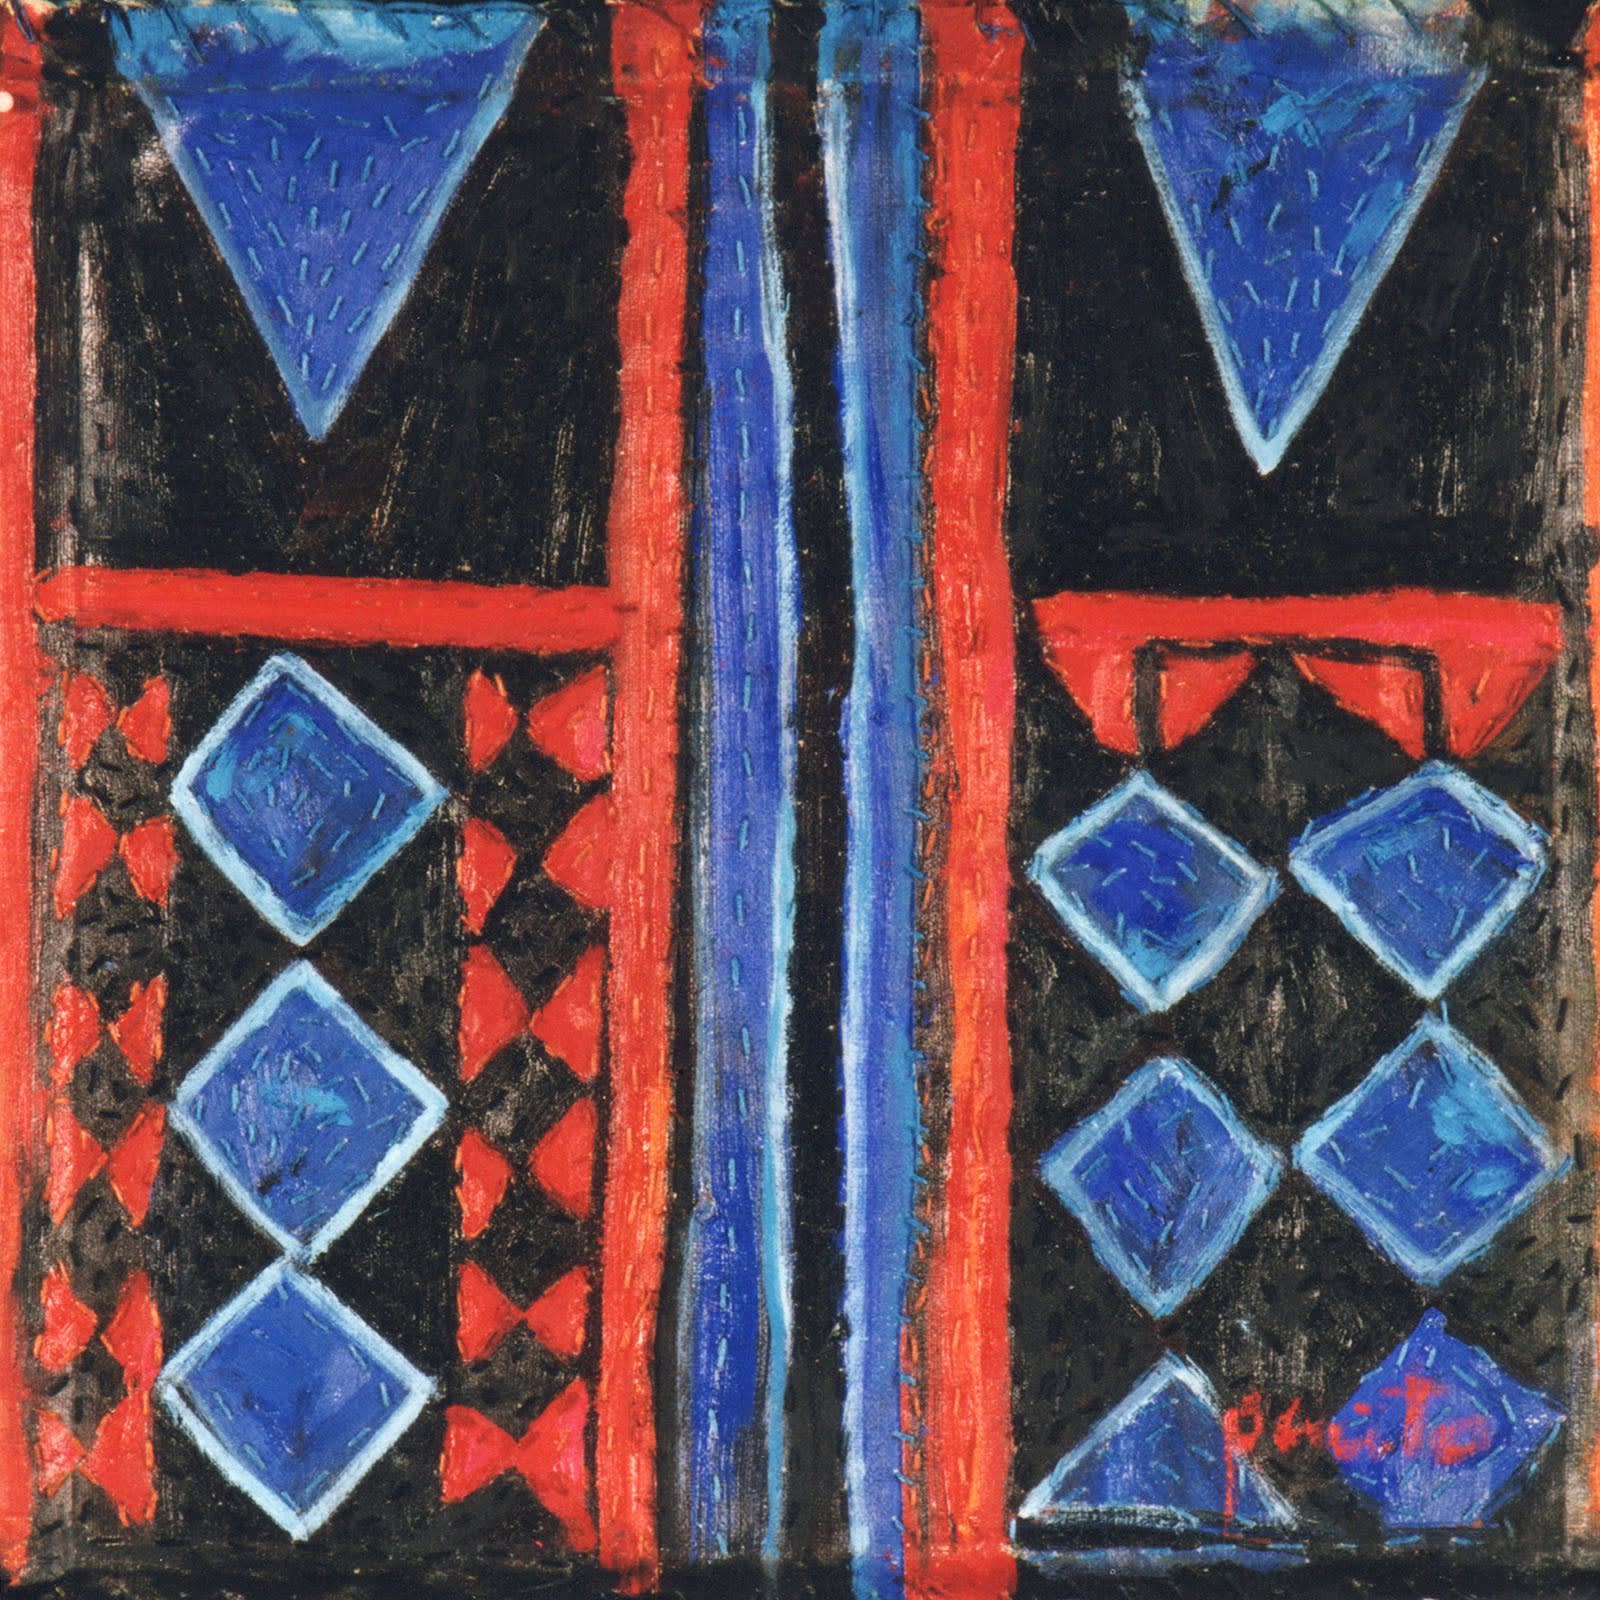 Blue and evasive, 1998 Oil, painted cloth stitched on canvas 12 x 12 in 30 x 30 cm